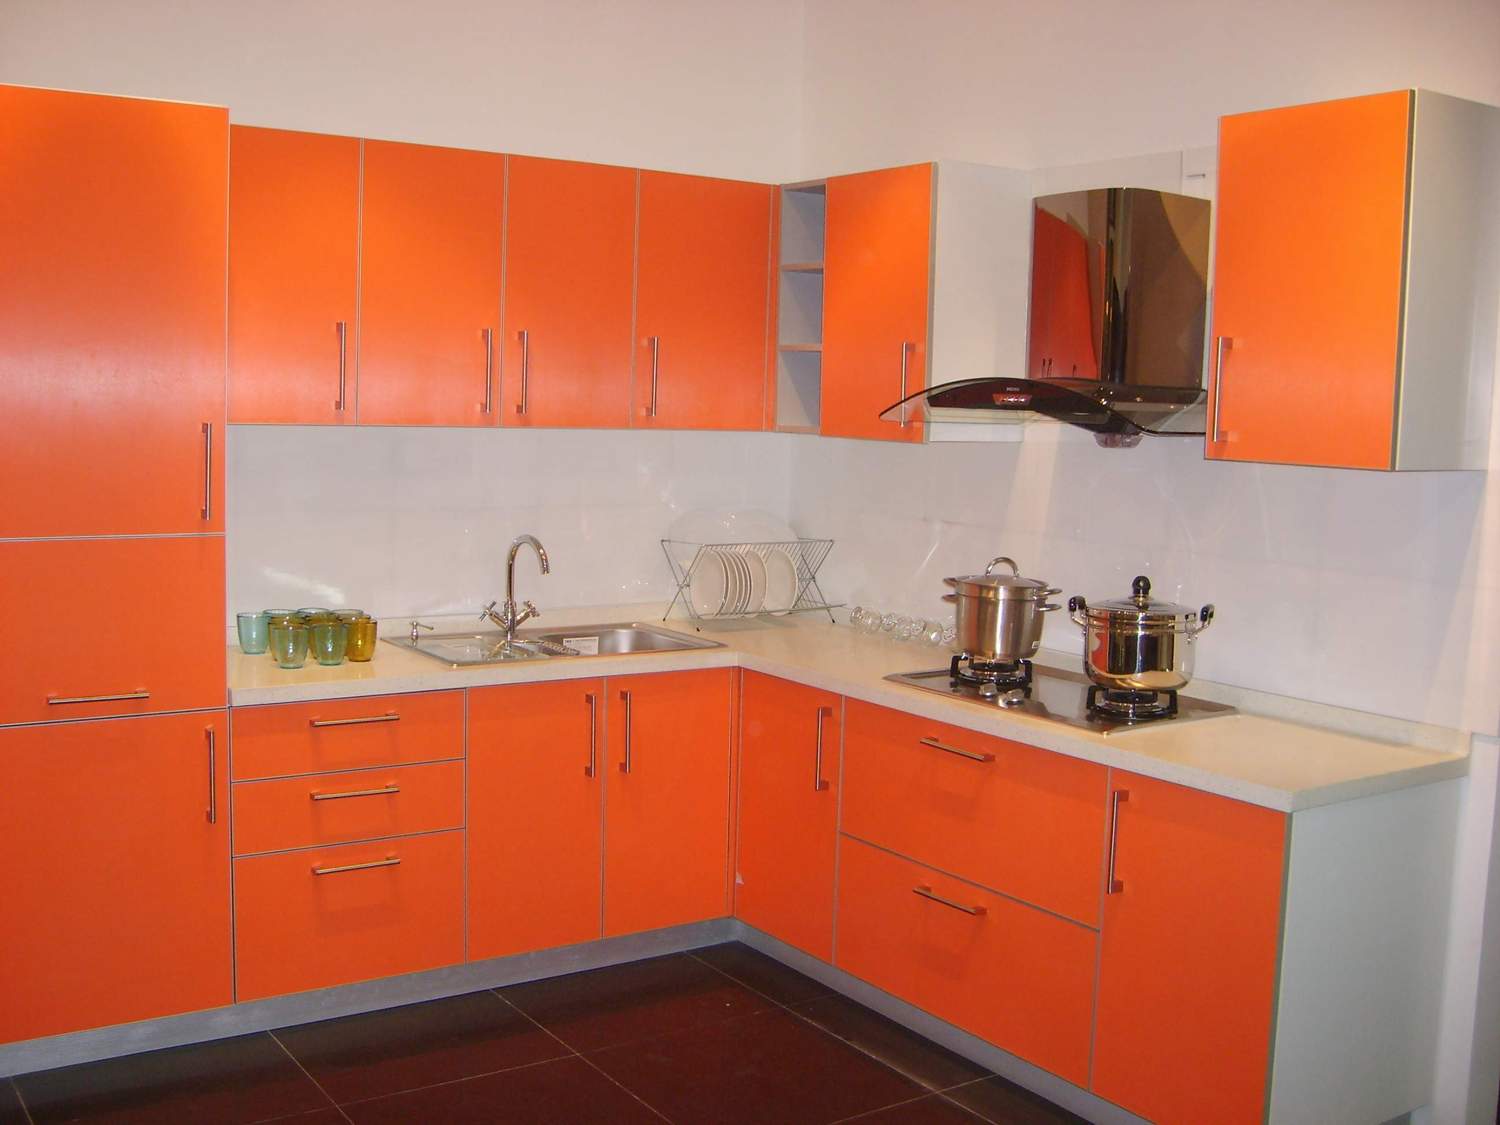 Orange Kitchen Kitchen Excellent Orange Kitchen With Contemporary Kitchen Cabinets Completed With Cups Also Plates And Sink Furnished With Electric Range Plus Modern Countertop Kitchen 15 Contemporary Kitchen Cabinets For Tiny Kitchen Sets